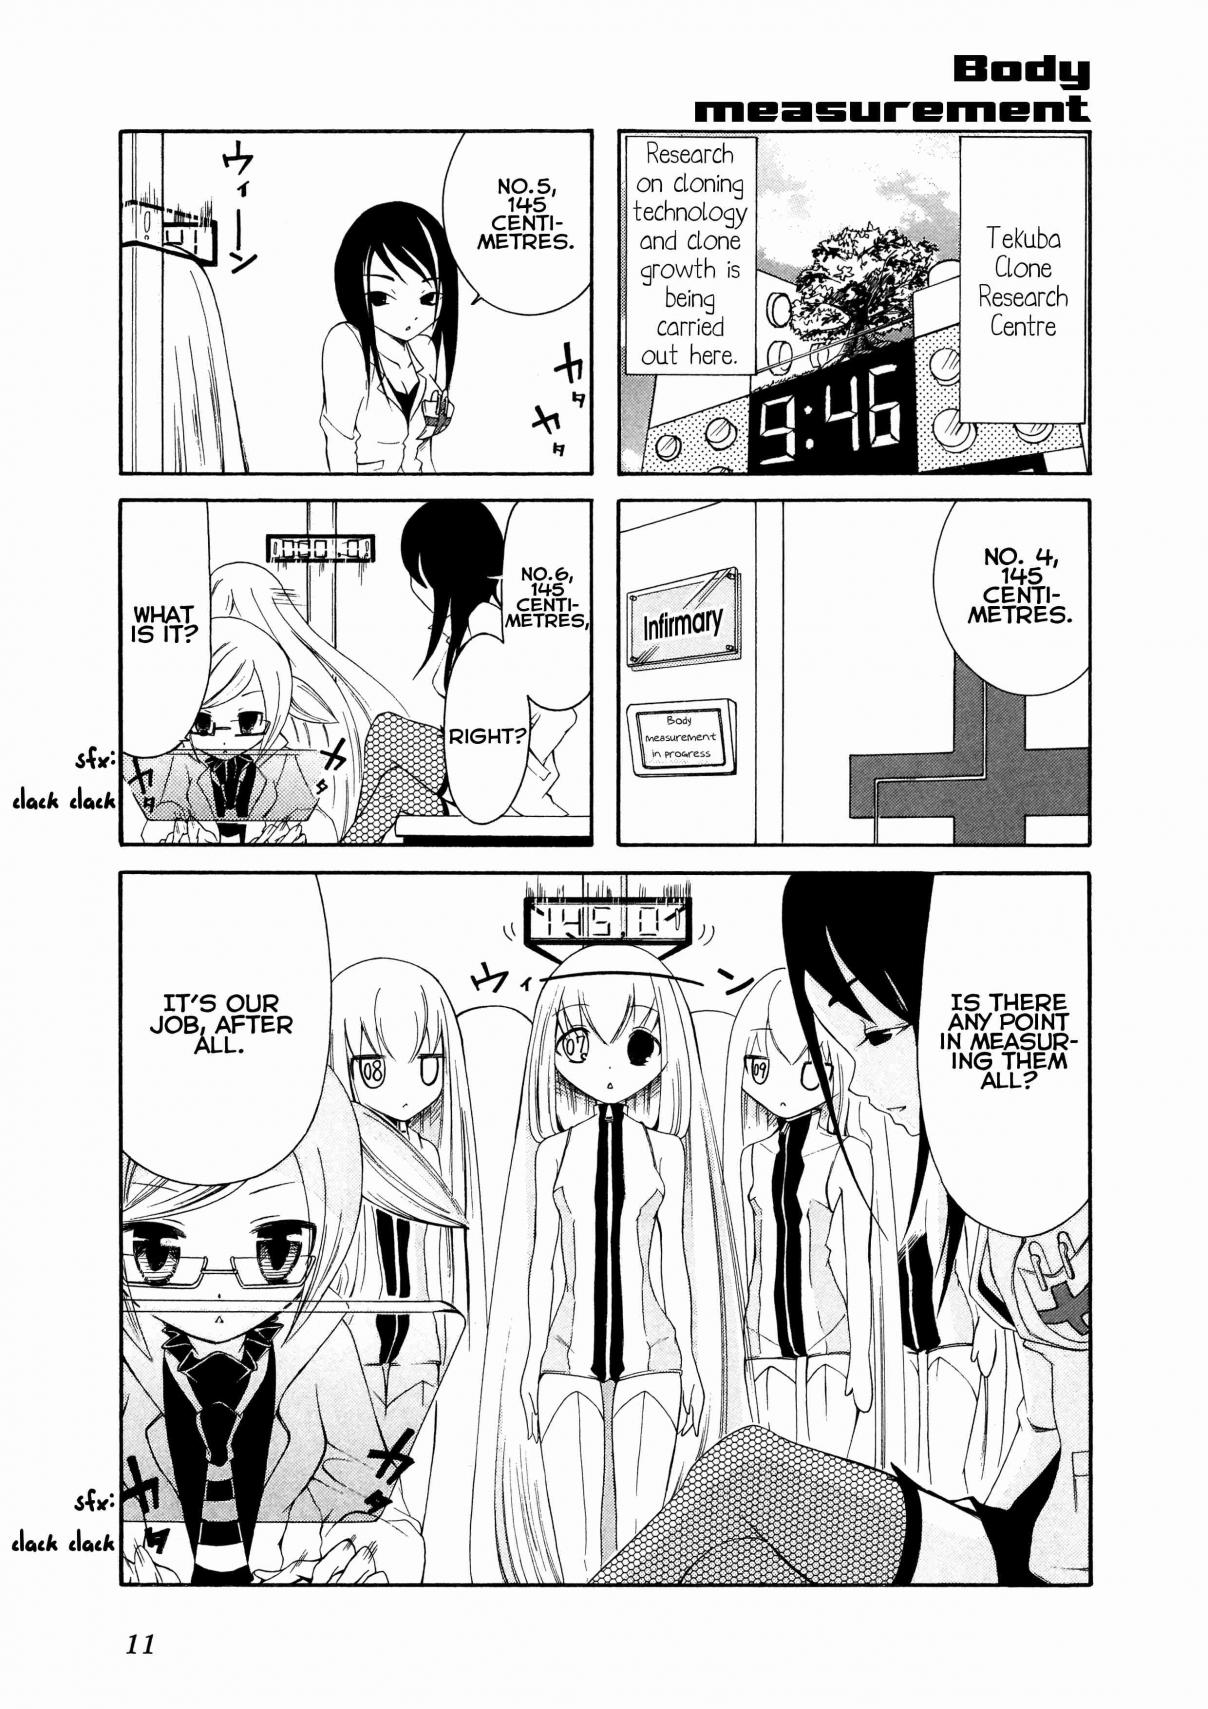 Number Girl Vol. 1 Ch. 2